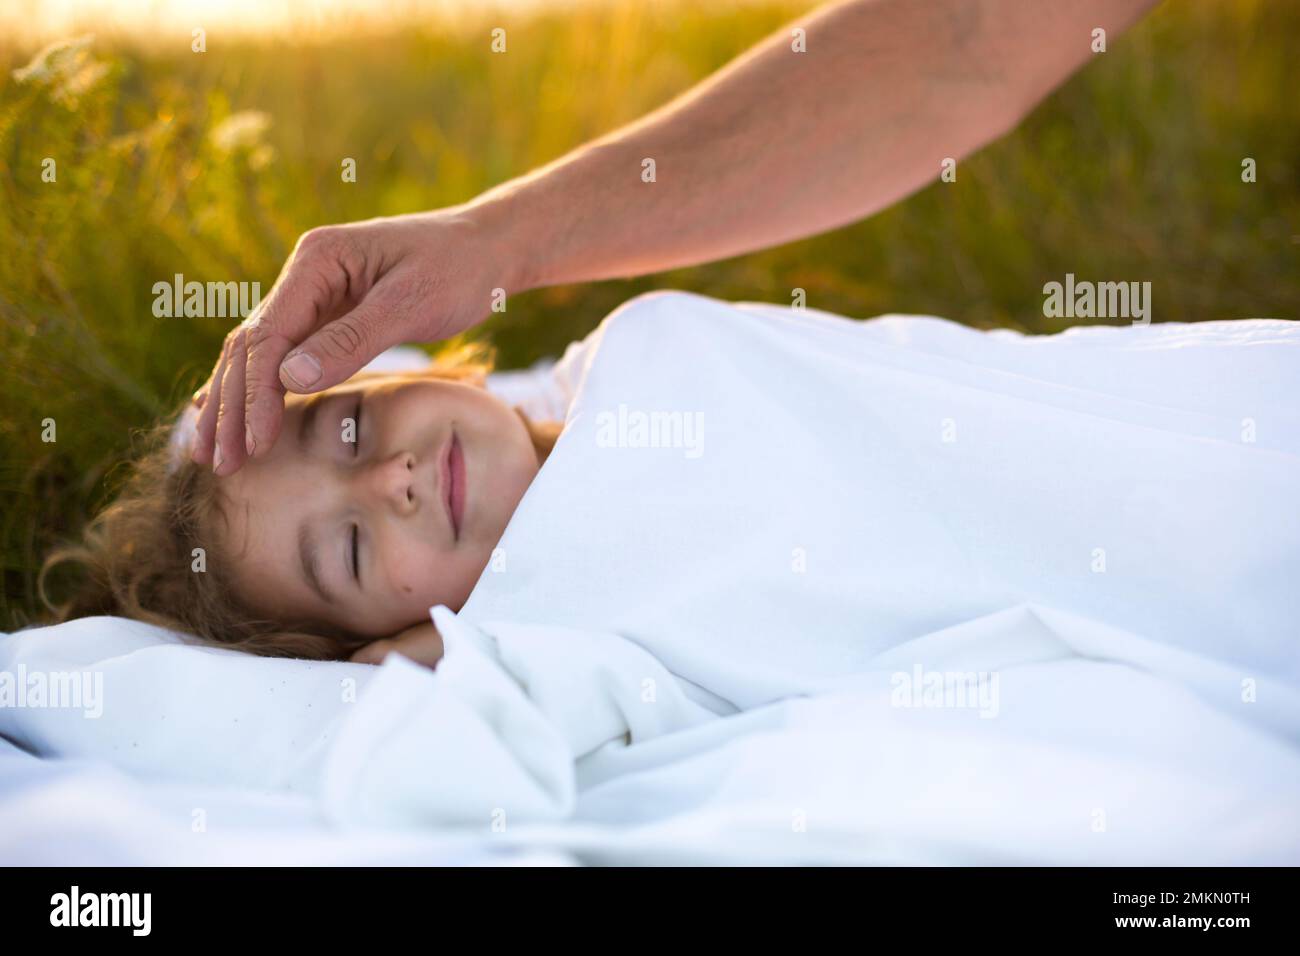 Girl sleeps on white bed in the grass, fresh air. Dad's hand gently pats his head. Care, protection, International Children's Day, mosquito bites Stock Photo